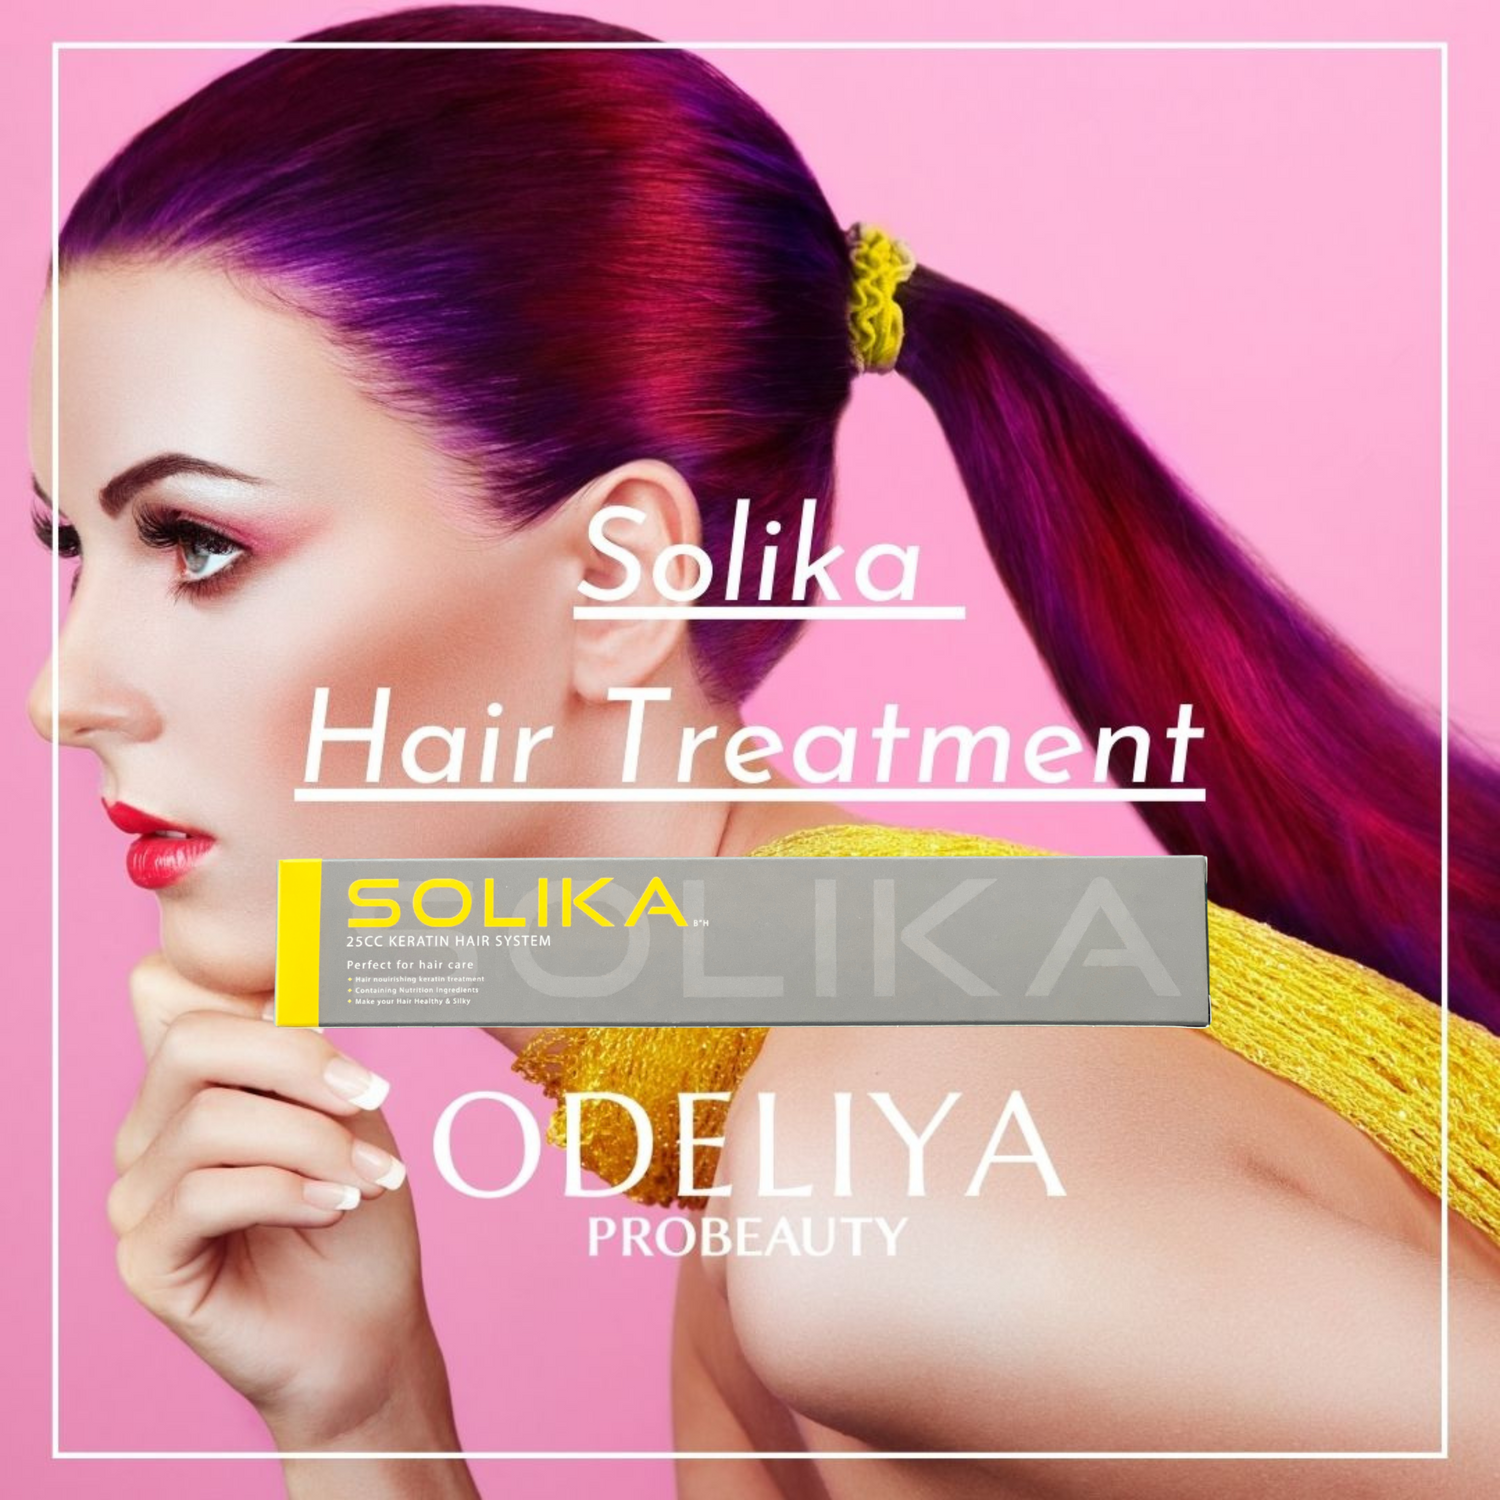 Solika- The Ultimate Hair Treatment